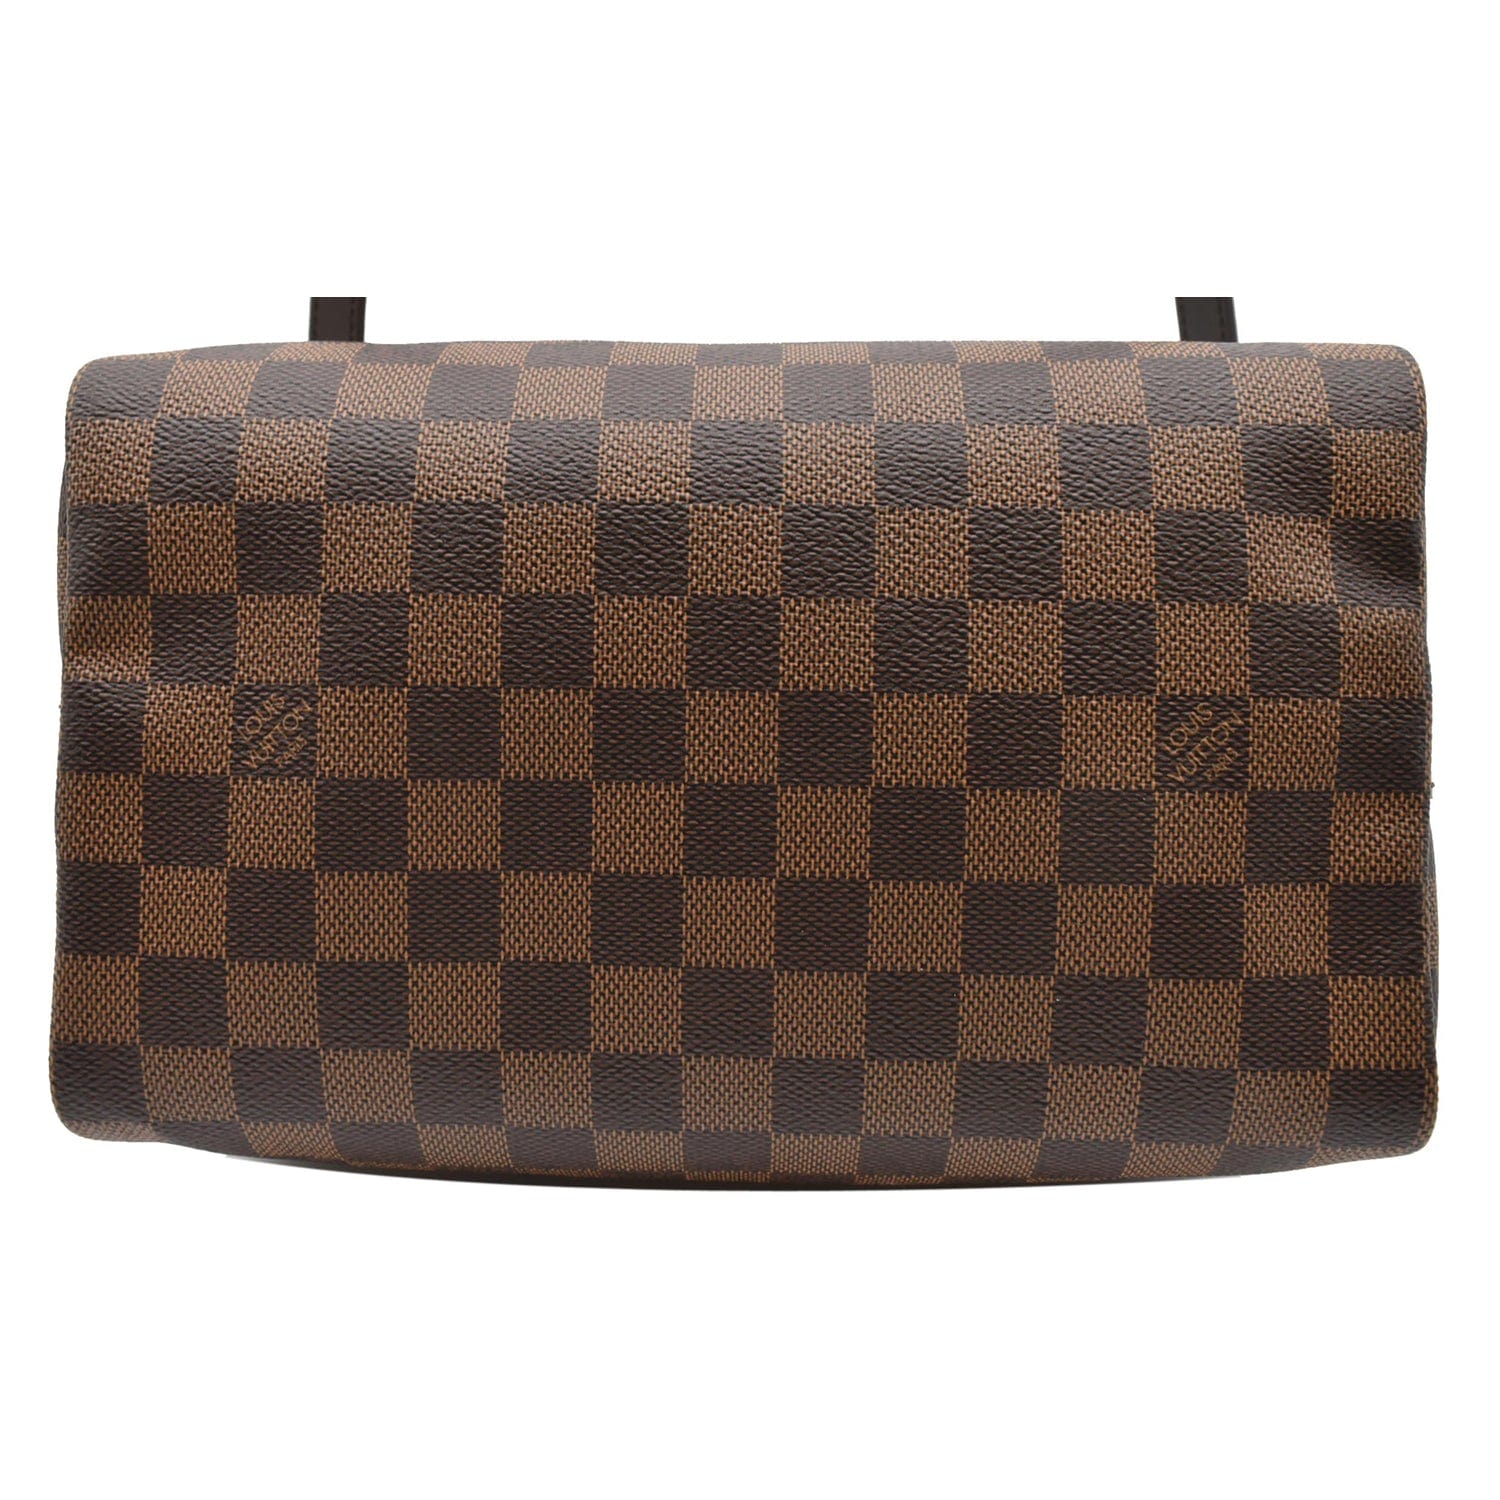 Louis Vuitton Speedy Bandouliere Damier Ebene Time Trunk 25 Brown  Multicolor in Coated Canvas with Gold-tone - GB